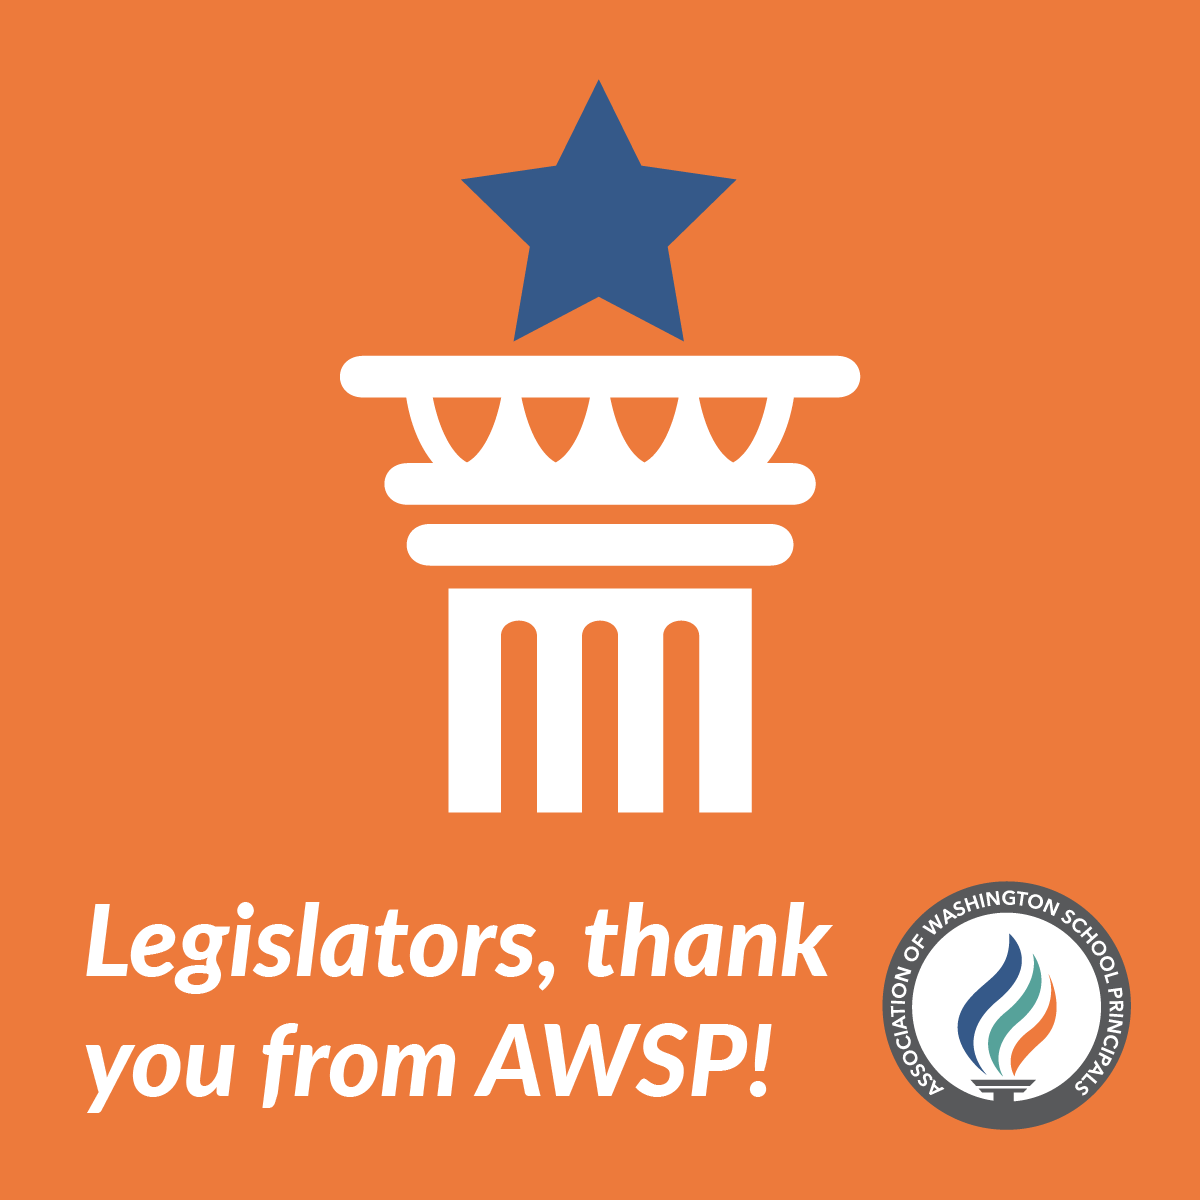 AWSP thanks our Washington state legislators for helping grow, support, and sustain school leaders and the students and communities they serve during this year's legislative session. @WAHouseDems @WaHouseGOP @WASenDemocrats @WashingtonSRC